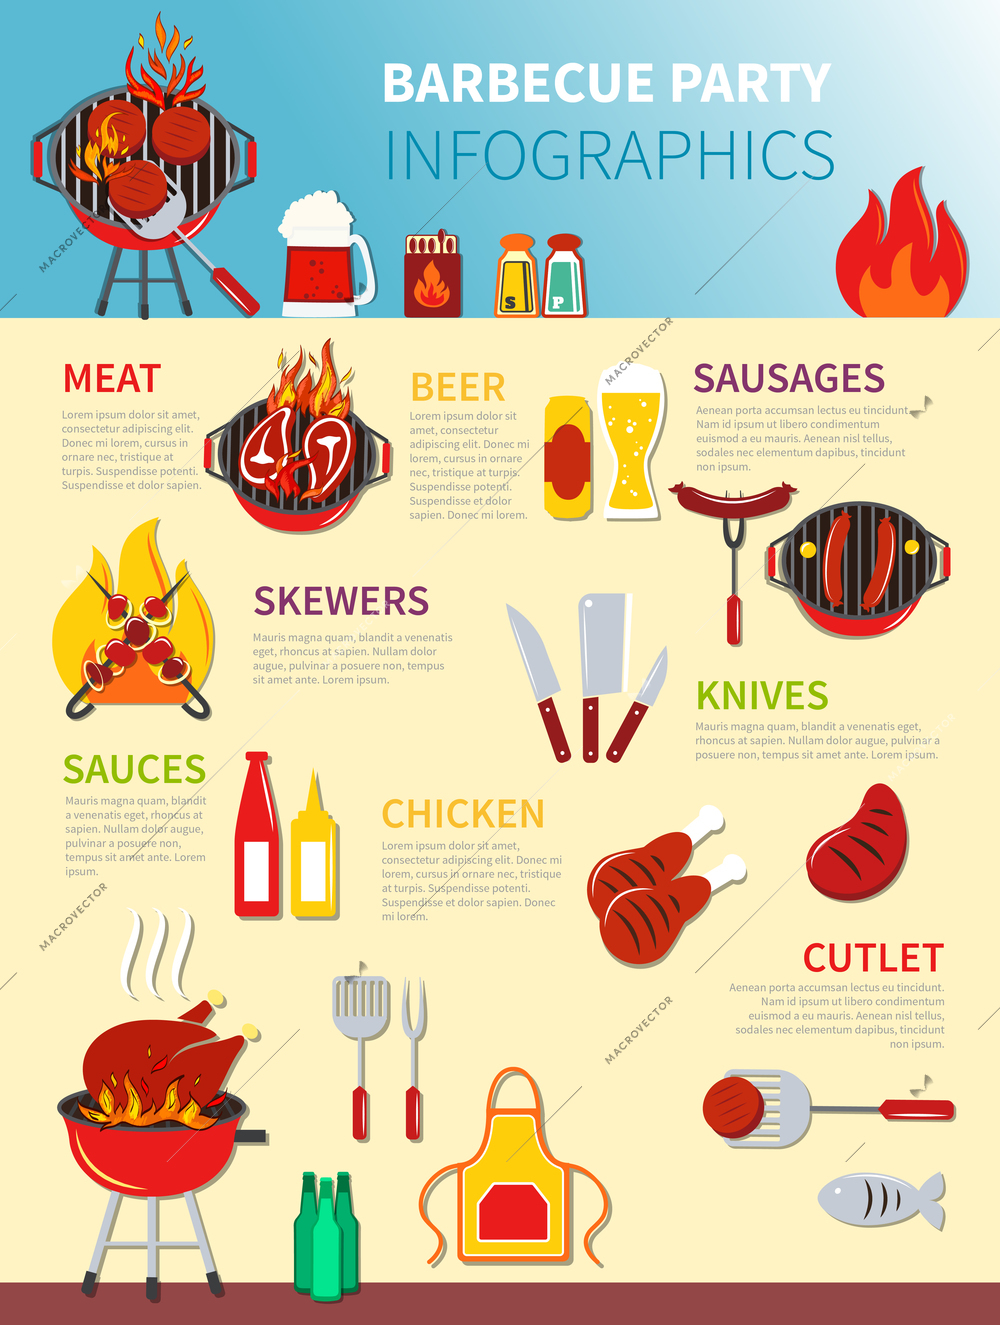 Barbecue party infographics drawing different icons of food and drinks vector illustration